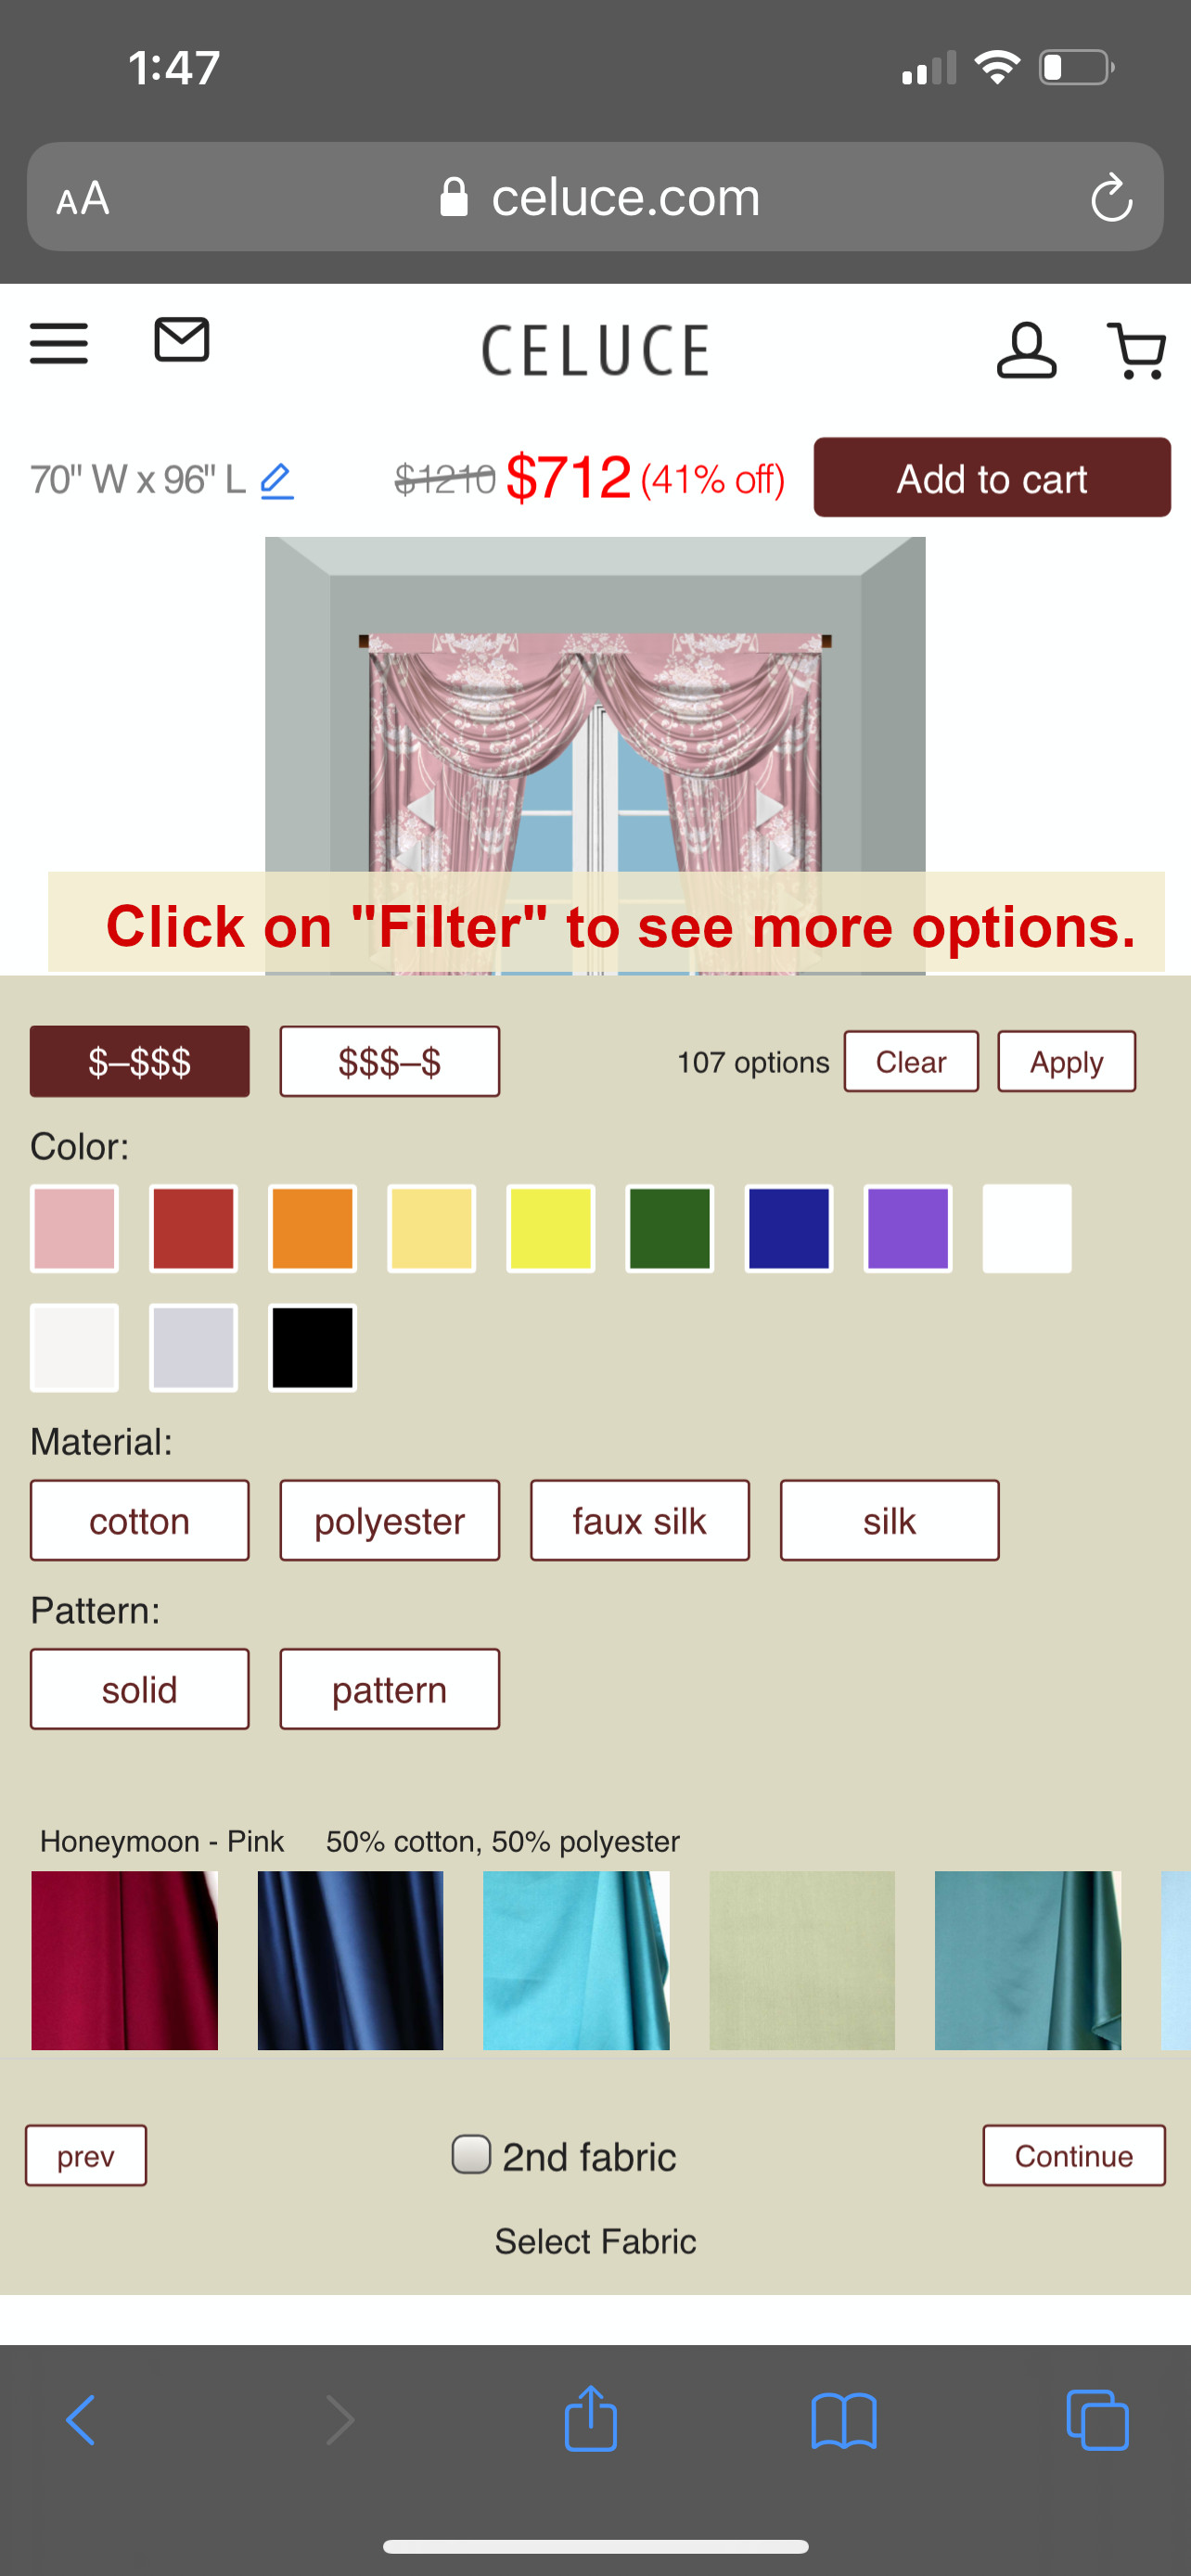 Filter fabric options